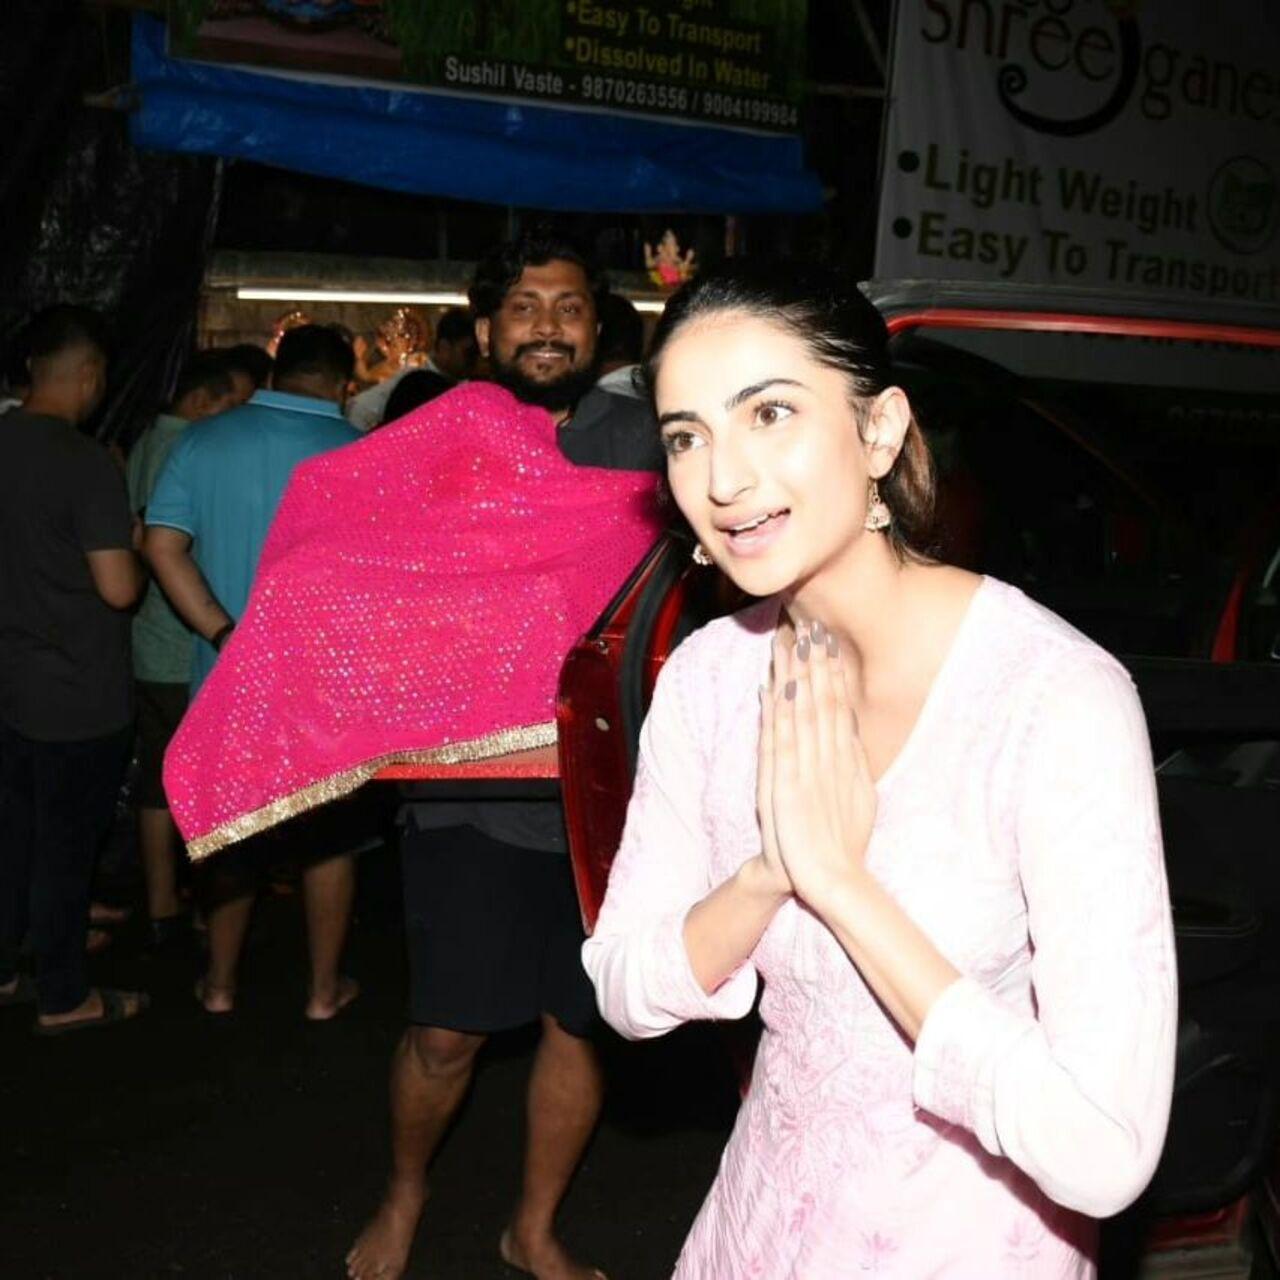 Palak Tiwari greets the paps as she arrives home with the Lord